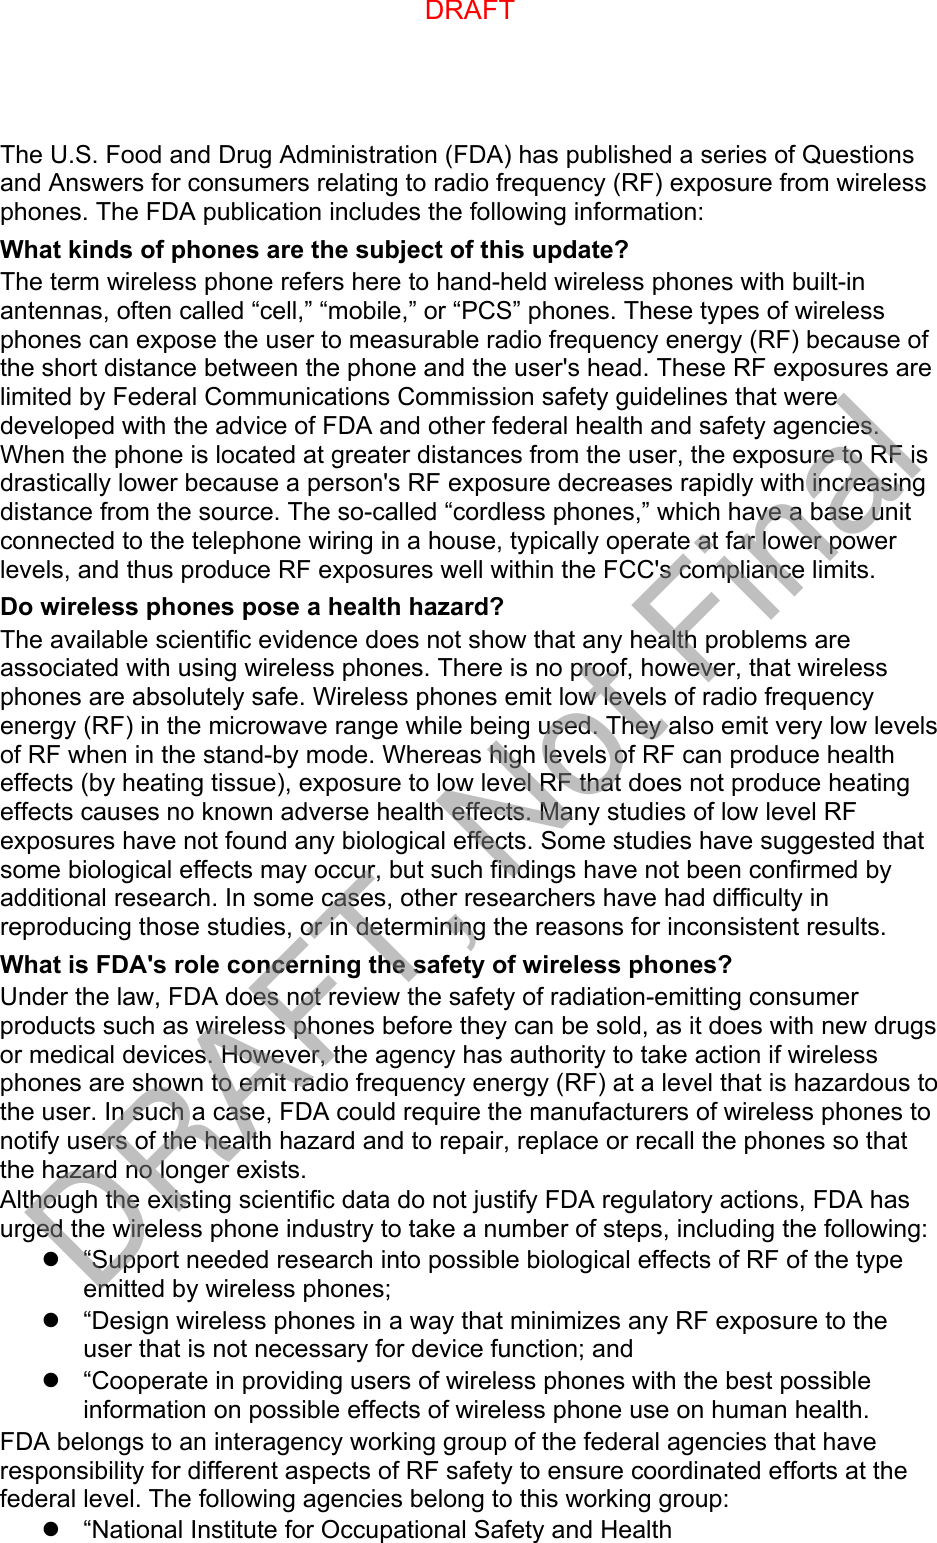 The U.S. Food and Drug Administration (FDA) has published a series of Questions and Answers for consumers relating to radio frequency (RF) exposure from wireless phones. The FDA publication includes the following information: What kinds of phones are the subject of this update? The term wireless phone refers here to hand-held wireless phones with built-in antennas, often called “cell,” “mobile,” or “PCS” phones. These types of wireless phones can expose the user to measurable radio frequency energy (RF) because of the short distance between the phone and the user&apos;s head. These RF exposures are limited by Federal Communications Commission safety guidelines that were developed with the advice of FDA and other federal health and safety agencies. When the phone is located at greater distances from the user, the exposure to RF is drastically lower because a person&apos;s RF exposure decreases rapidly with increasing distance from the source. The so-called “cordless phones,” which have a base unit connected to the telephone wiring in a house, typically operate at far lower power levels, and thus produce RF exposures well within the FCC&apos;s compliance limits. Do wireless phones pose a health hazard? The available scientific evidence does not show that any health problems are associated with using wireless phones. There is no proof, however, that wireless phones are absolutely safe. Wireless phones emit low levels of radio frequency energy (RF) in the microwave range while being used. They also emit very low levels of RF when in the stand-by mode. Whereas high levels of RF can produce health effects (by heating tissue), exposure to low level RF that does not produce heating effects causes no known adverse health effects. Many studies of low level RF exposures have not found any biological effects. Some studies have suggested that some biological effects may occur, but such findings have not been confirmed by additional research. In some cases, other researchers have had difficulty in reproducing those studies, or in determining the reasons for inconsistent results. What is FDA&apos;s role concerning the safety of wireless phones? Under the law, FDA does not review the safety of radiation-emitting consumer products such as wireless phones before they can be sold, as it does with new drugs or medical devices. However, the agency has authority to take action if wireless phones are shown to emit radio frequency energy (RF) at a level that is hazardous to the user. In such a case, FDA could require the manufacturers of wireless phones to notify users of the health hazard and to repair, replace or recall the phones so that the hazard no longer exists. Although the existing scientific data do not justify FDA regulatory actions, FDA has urged the wireless phone industry to take a number of steps, including the following: “Support needed research into possible biological effects of RF of the typeemitted by wireless phones;“Design wireless phones in a way that minimizes any RF exposure to theuser that is not necessary for device function; and“Cooperate in providing users of wireless phones with the best possibleinformation on possible effects of wireless phone use on human health.FDA belongs to an interagency working group of the federal agencies that have responsibility for different aspects of RF safety to ensure coordinated efforts at the federal level. The following agencies belong to this working group: “National Institute for Occupational Safety and HealthDRAFTDRAFT, Not Final